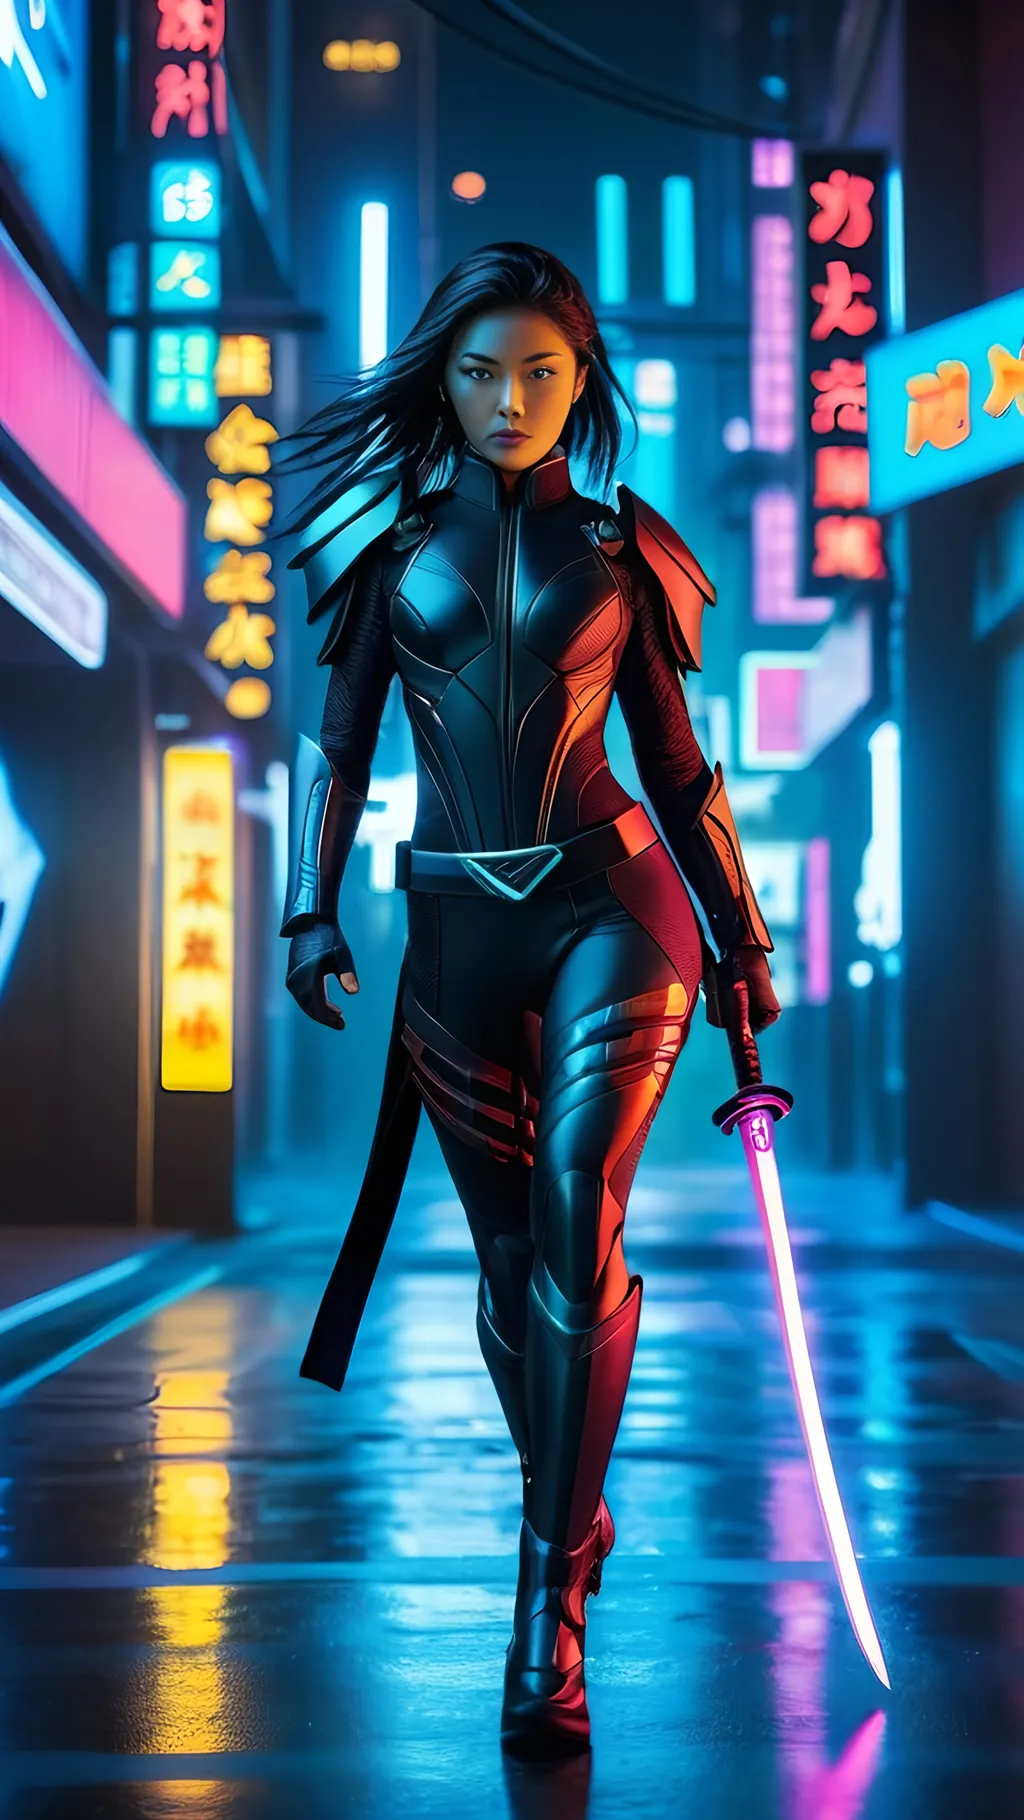 Prompt: full body.
Imagine a scene set in the neon-lit back alleys of a sprawling, futuristic city, where the boundary between technology and tradition blurs. In this cybernetic dreamscape, a young female teenage  ninja stands poised, a figure of mystery and power. She's clad in a skintight suit that seems to be a second skin, enhancing her lithe form with armor elements that are both protective and elegantly designed, showcasing an advanced civilization's pinnacle of combat attire. These armor pieces are strategically placed, not just for protection but to accentuate her swift, graceful movements.

The suit itself is a marvel of future fashion, imbued with technical enhancements visible through glowing lines and patterns that crisscross her attire, pulsating with light. These enhancements hint at capabilities far beyond human limits, such as augmented strength, speed, and perhaps even stealth technologies that allow her to blend into shadows or become nearly invisible at will.

In stark contrast to her futuristic gear, she wields a traditional katana. This blade, with its gleaming, razor-sharp edge, speaks of an ancient warrior tradition that she carries forward into this high-tech era. It's a symbol of her skill, discipline, and the silent oath she has taken to whatever cause she serves. The katana is both a weapon and a piece of art, reflecting the neon lights in its polished surface.

Her face is unobscured, revealing a determined gaze that pierces through the darkness. Her eyes, perhaps enhanced with cybernetic augmentations, scan the environment with a predator's focus. Her hair might be styled in a way that compliments her dynamic silhouette, perhaps pulled back or cut short, to not hinder her movements and to emphasize her fearless nature.

This young ninja is a fusion of past and future, a guardian of secrets in a world where information is the ultimate currency. She moves through the cybernetic landscape with purpose, ready to engage in a dance of shadows and light.